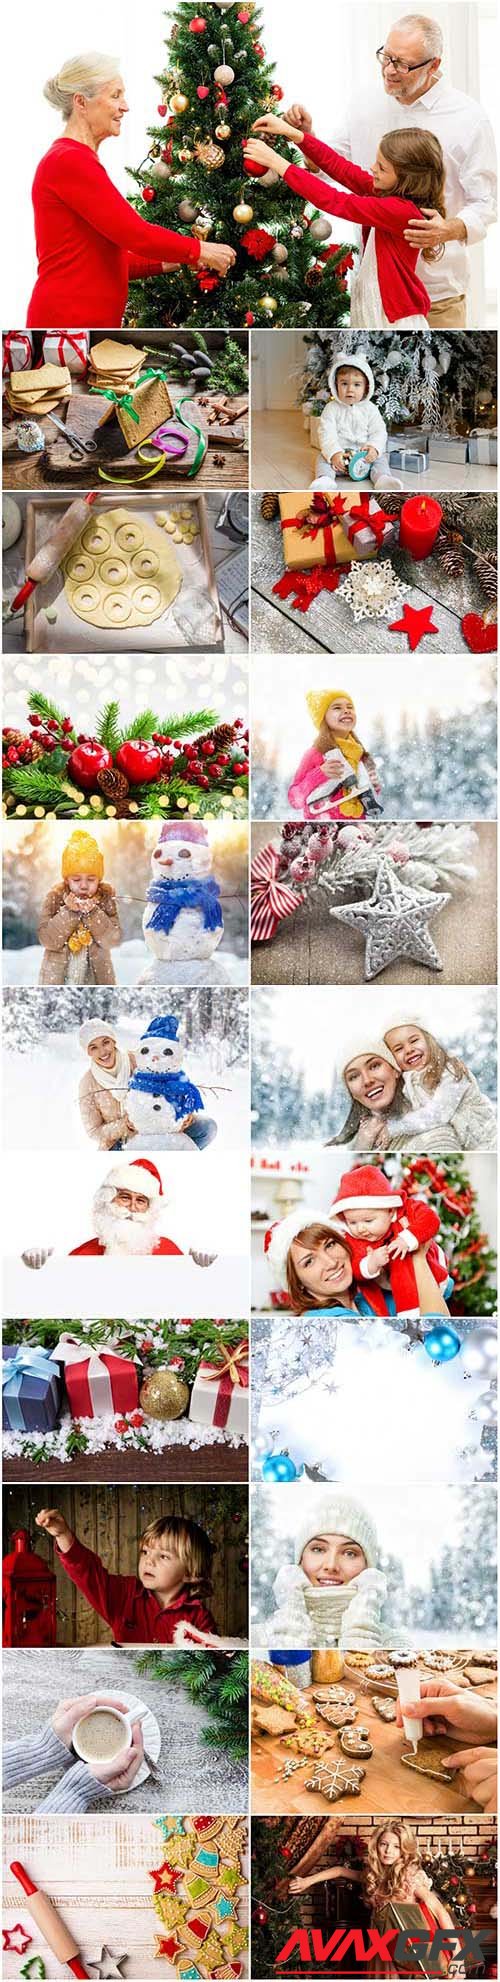 New Year and Christmas stock photos 94